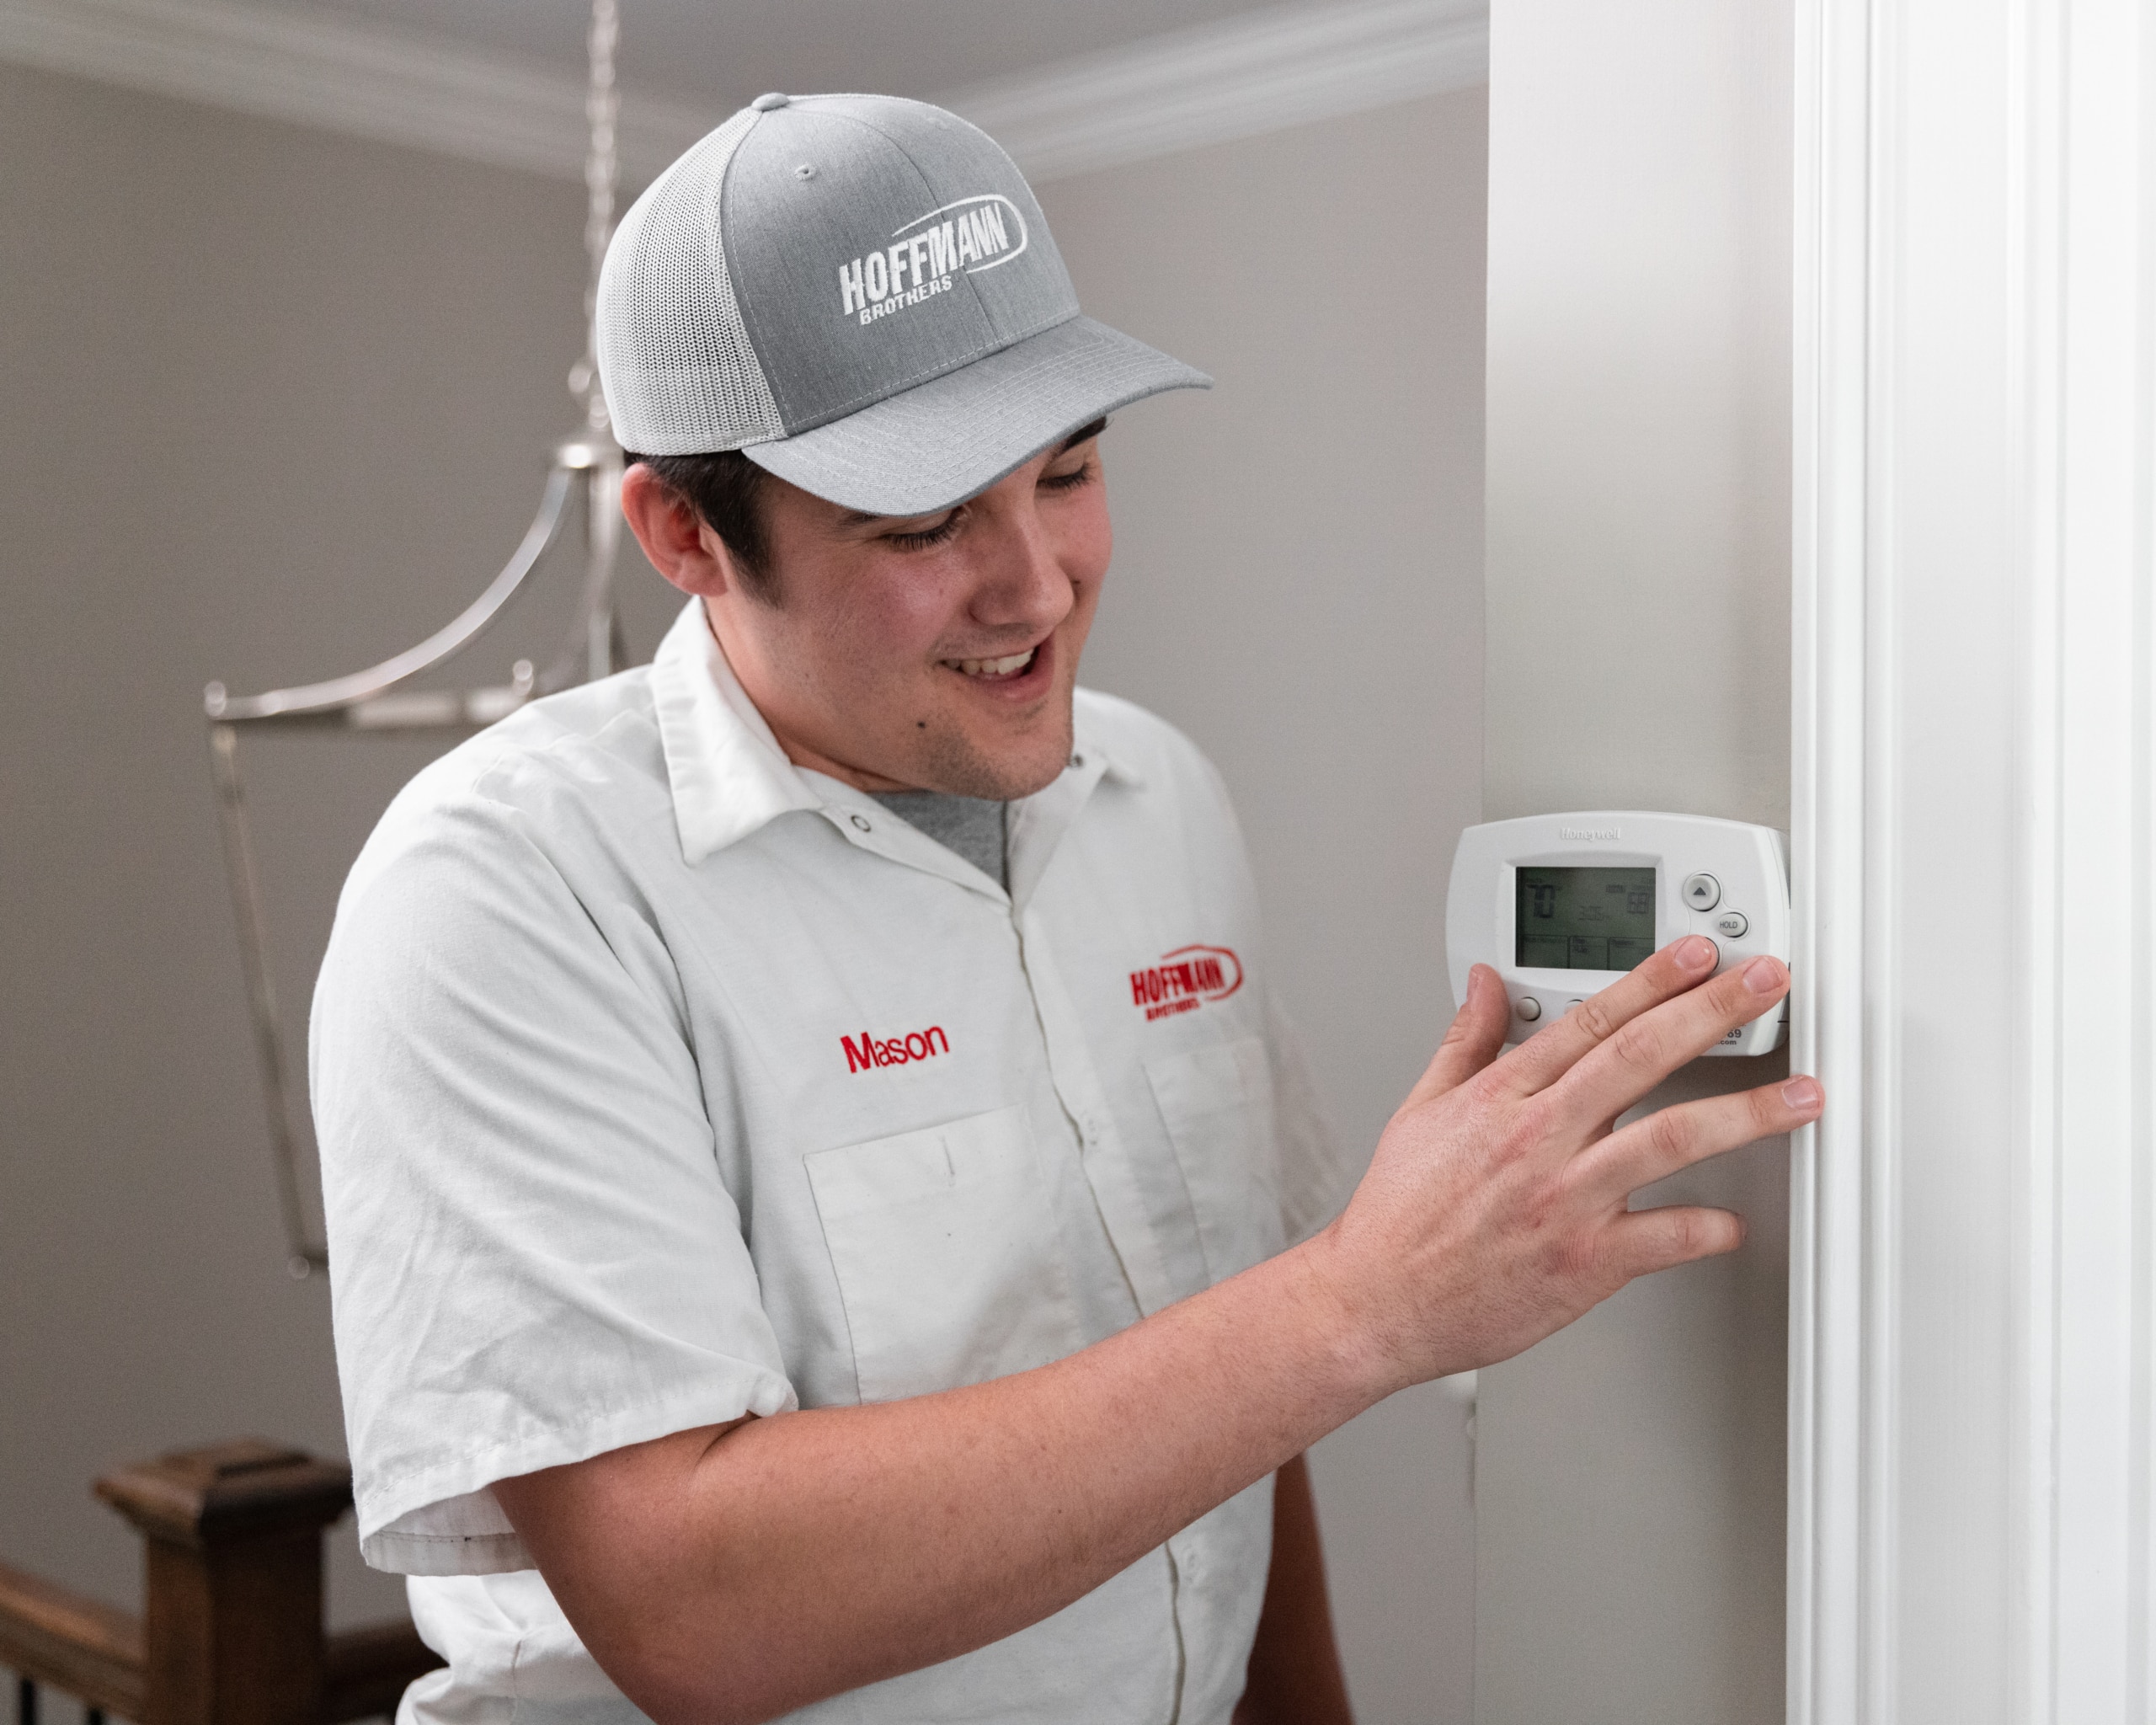 Heating Installation Services By Hoffmann Brothers In Nashville, Tennessee